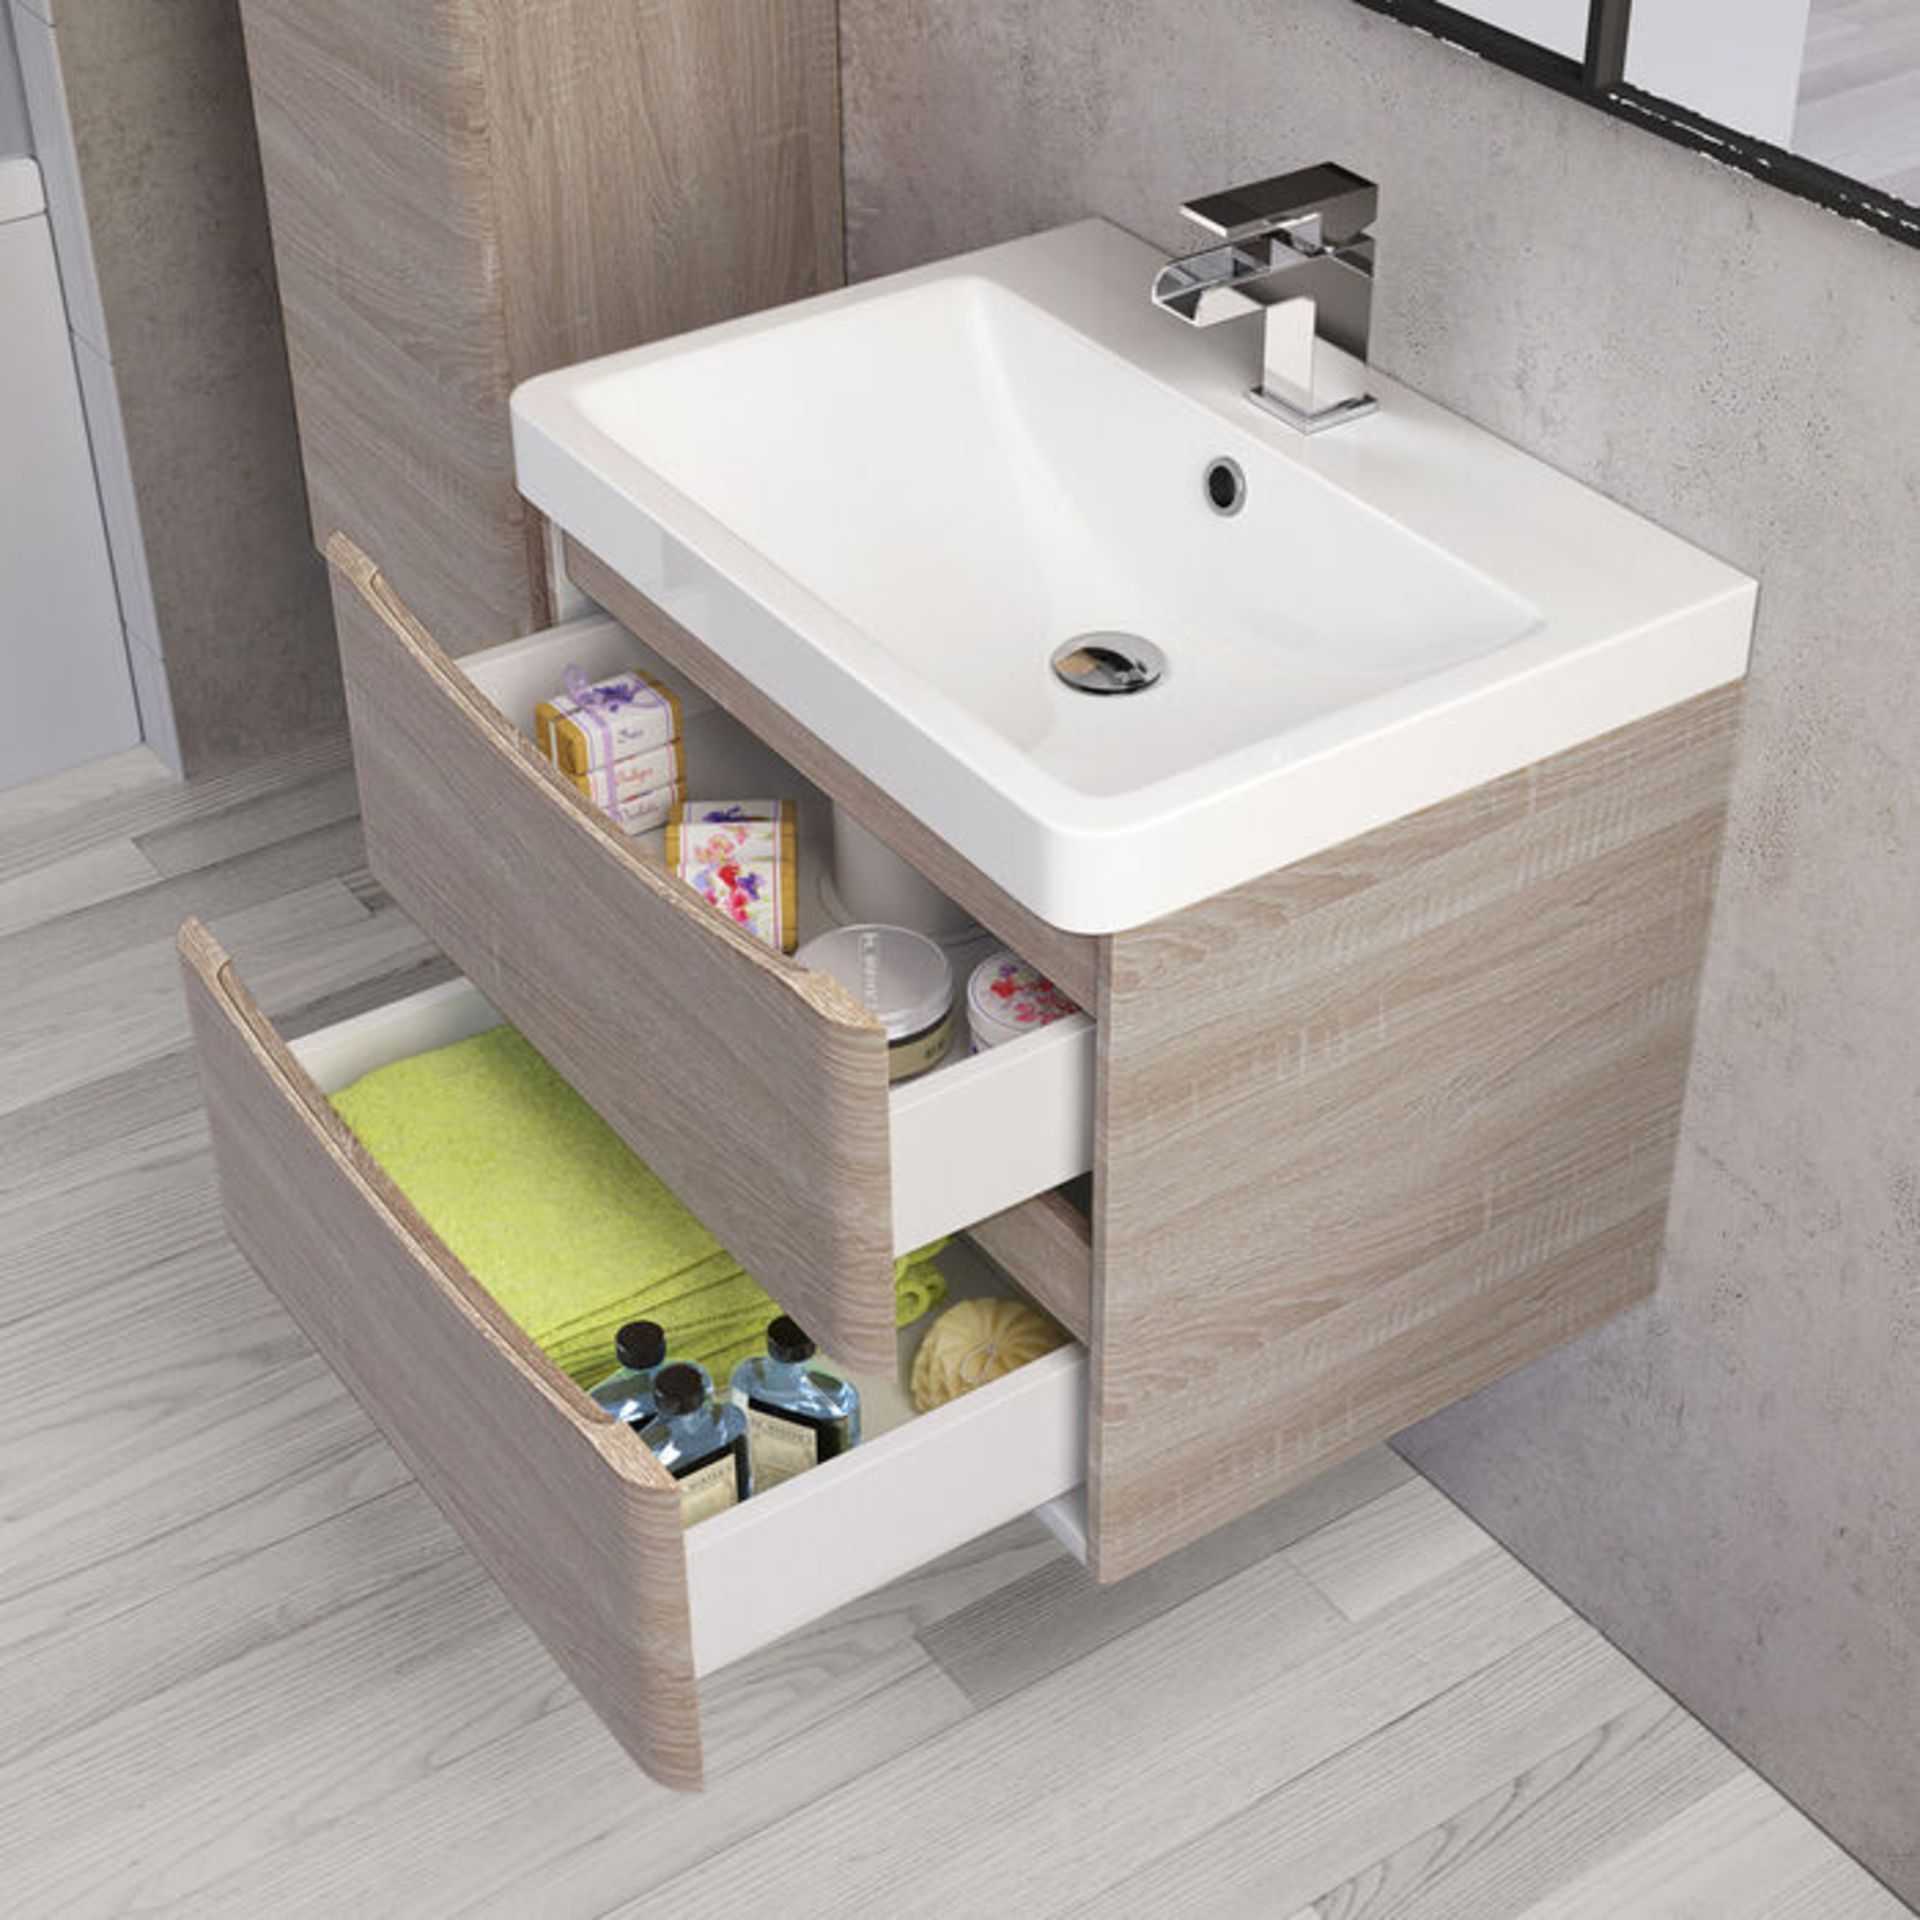 NEW & BOXED 600mm Austin II Light Oak Effect Built In Sink Drawer Unit - Wall Hung. RRP £849.9... - Image 2 of 2